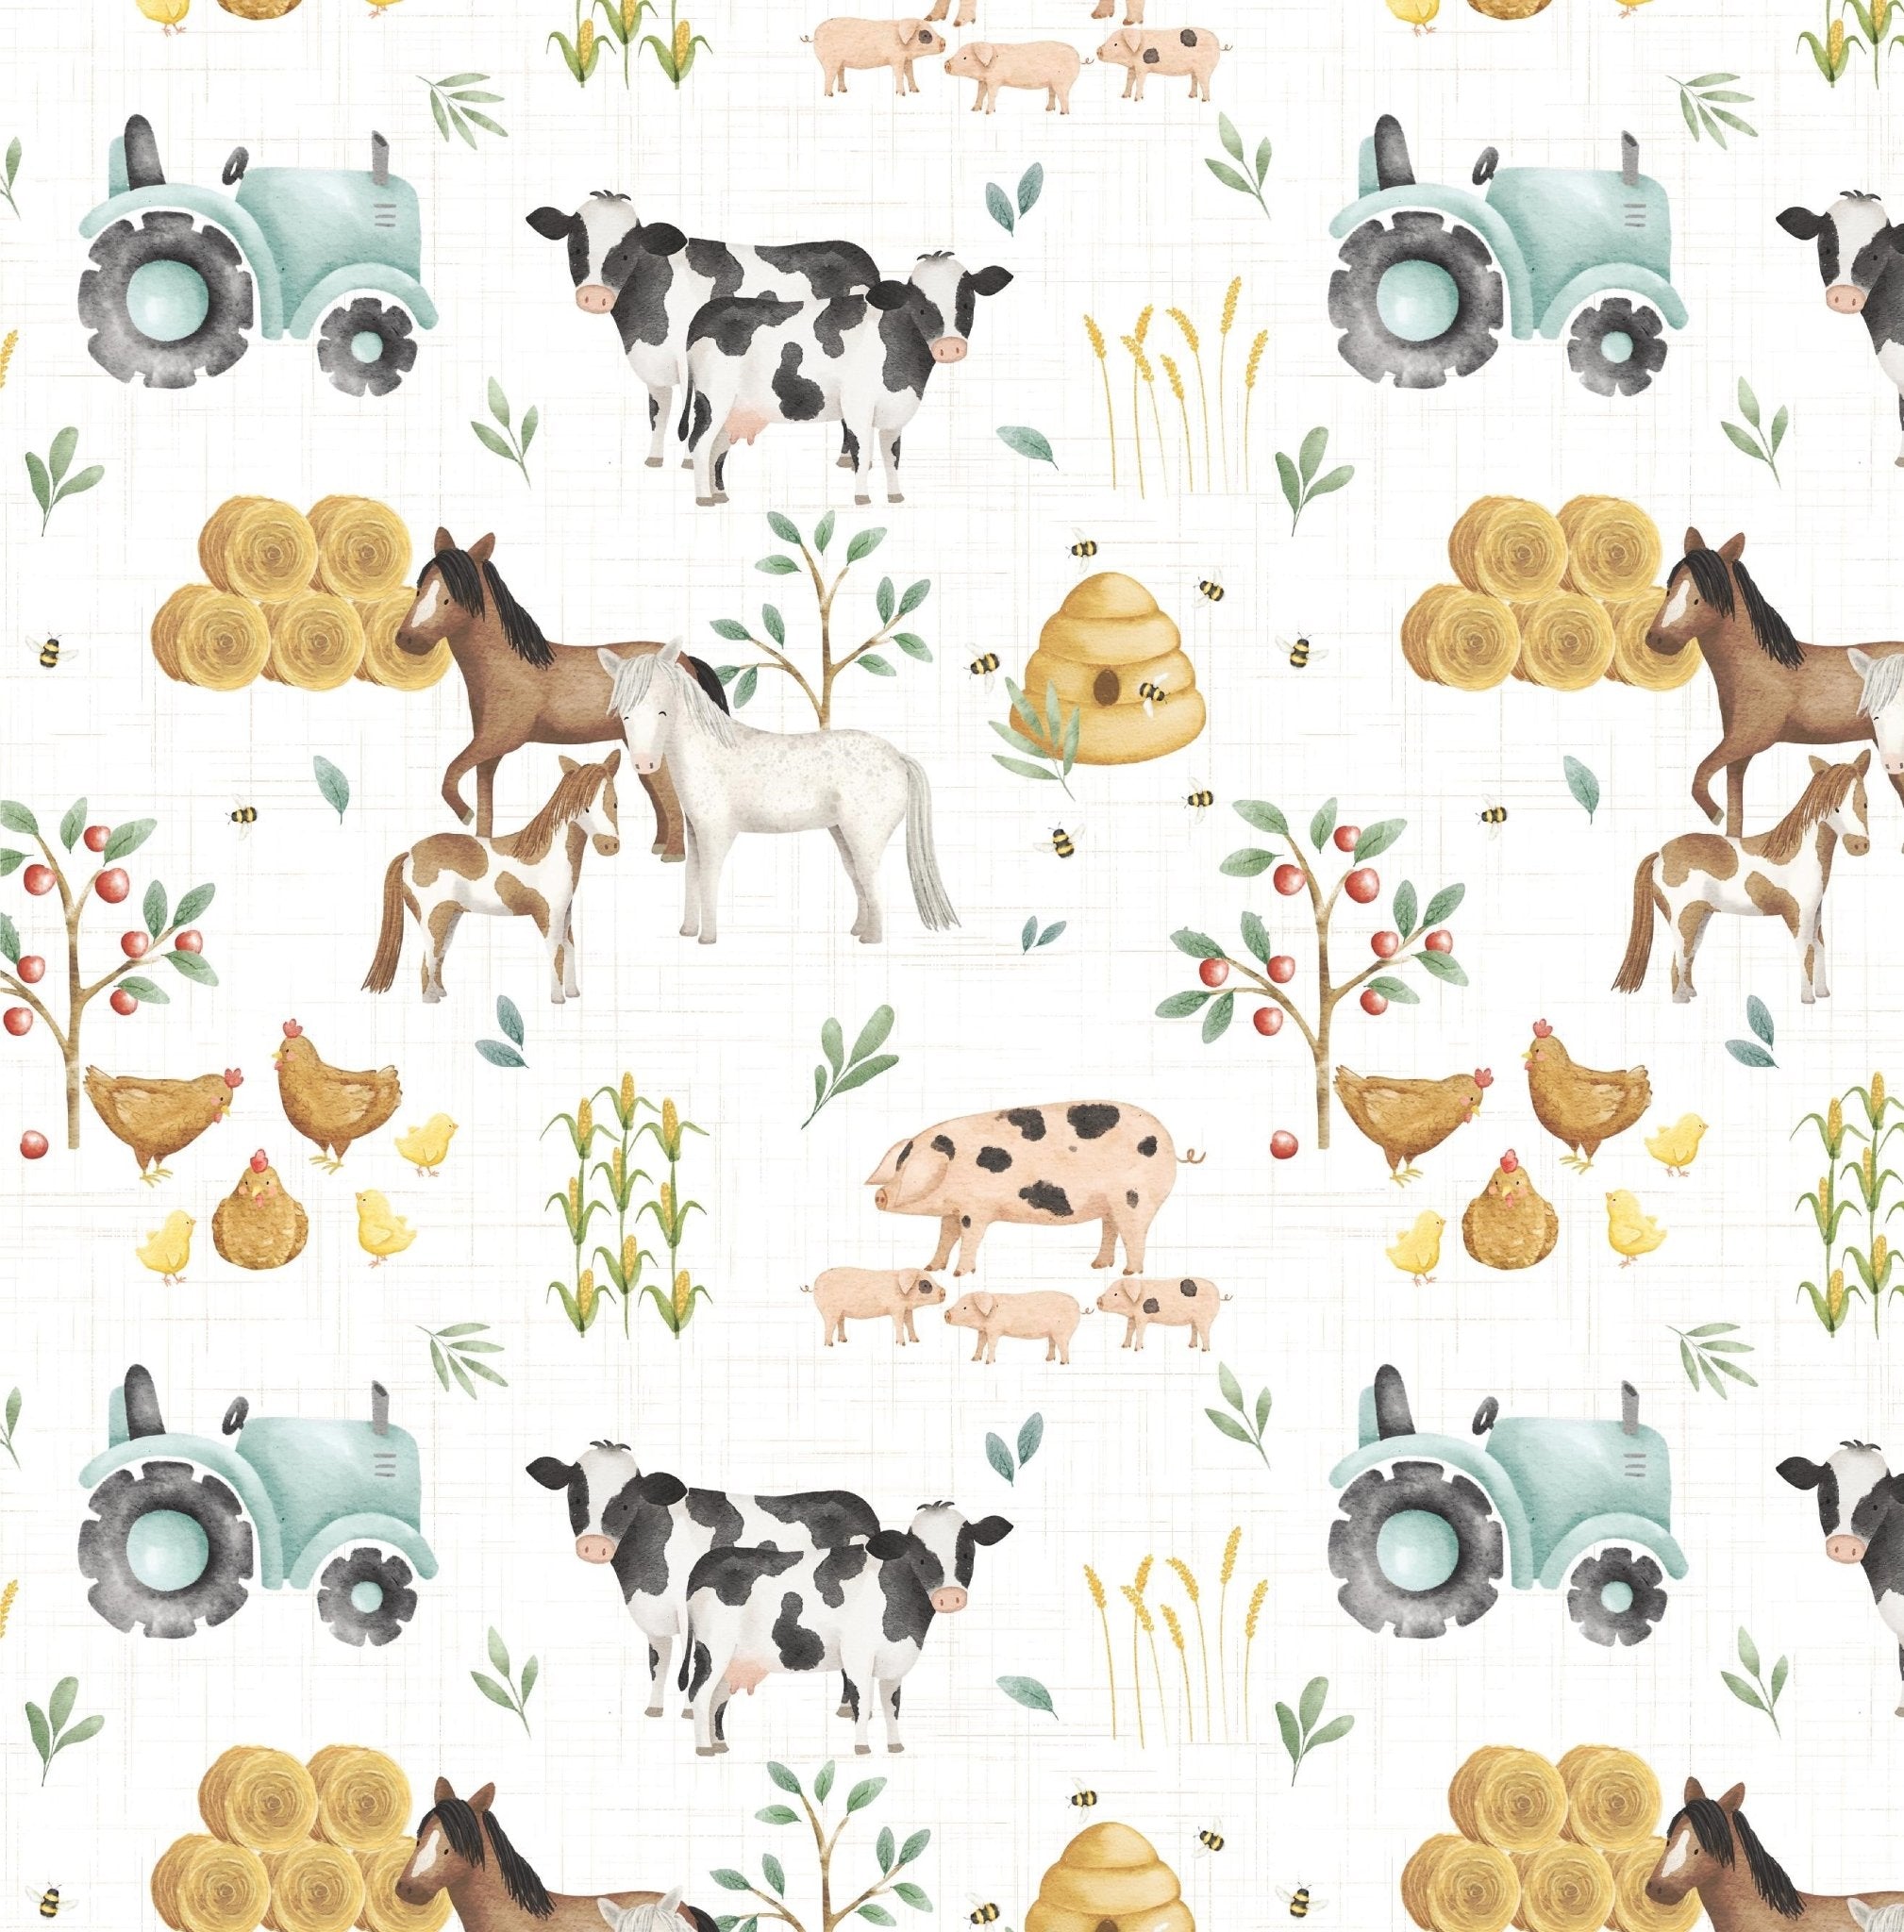 Tractor and Farm animal wallpaper with cows, horses, pigs, chickens, bees, hay and tractors